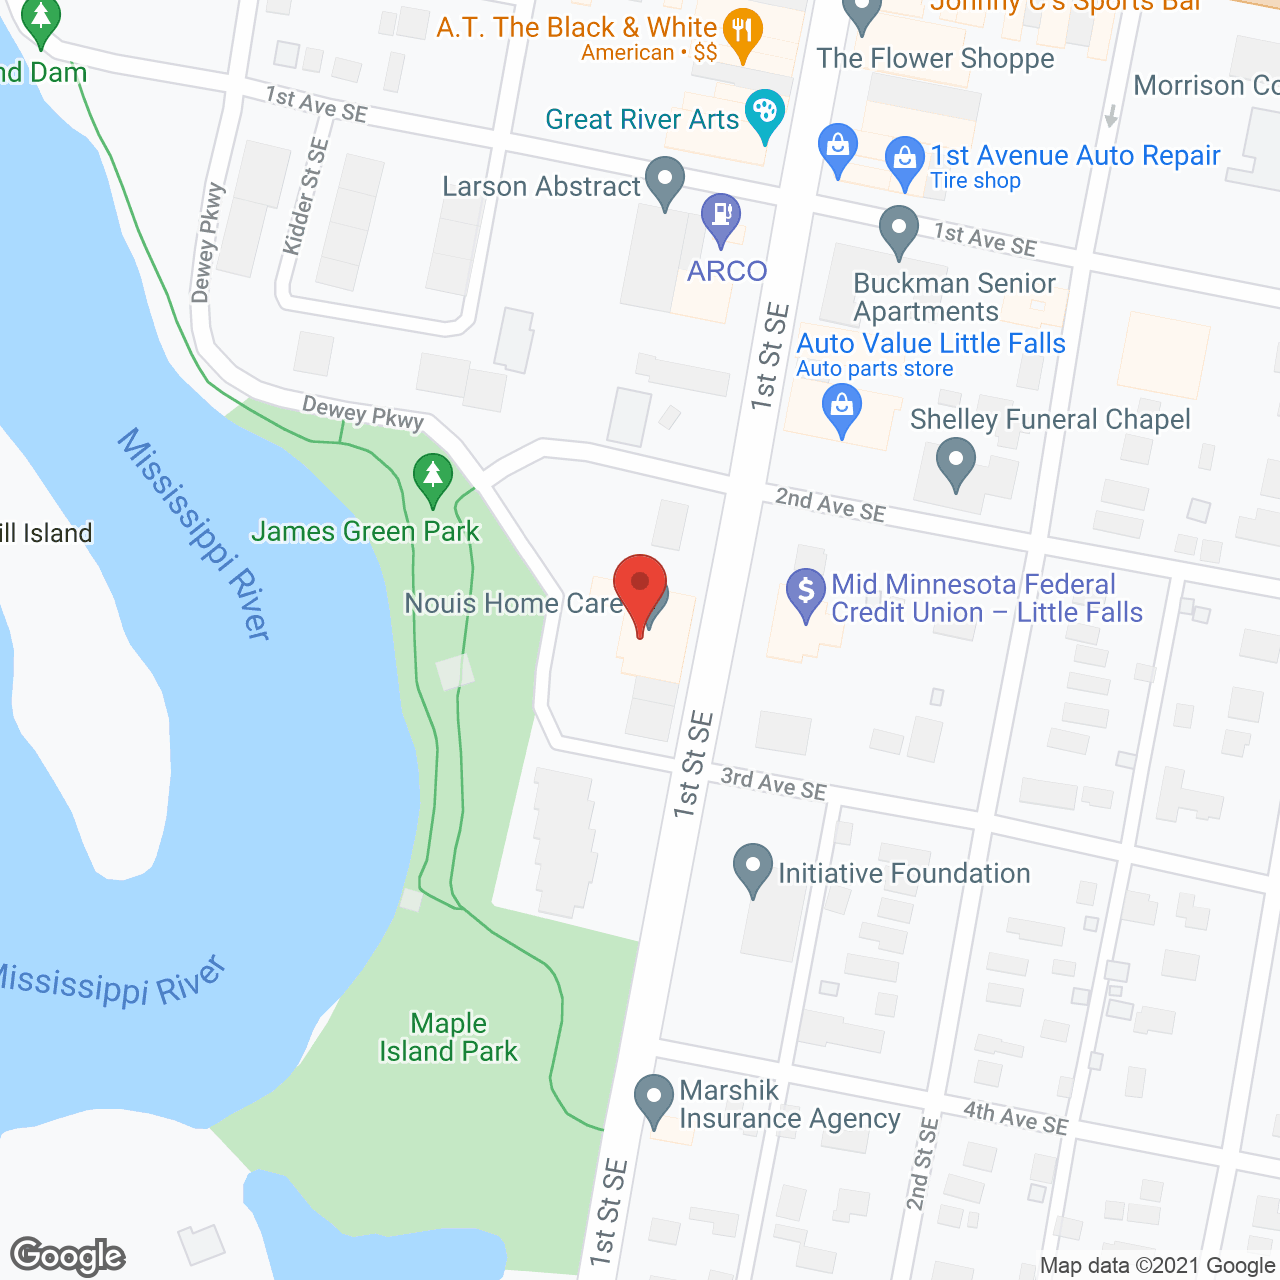 Nouis Home Care,  Inc. in google map